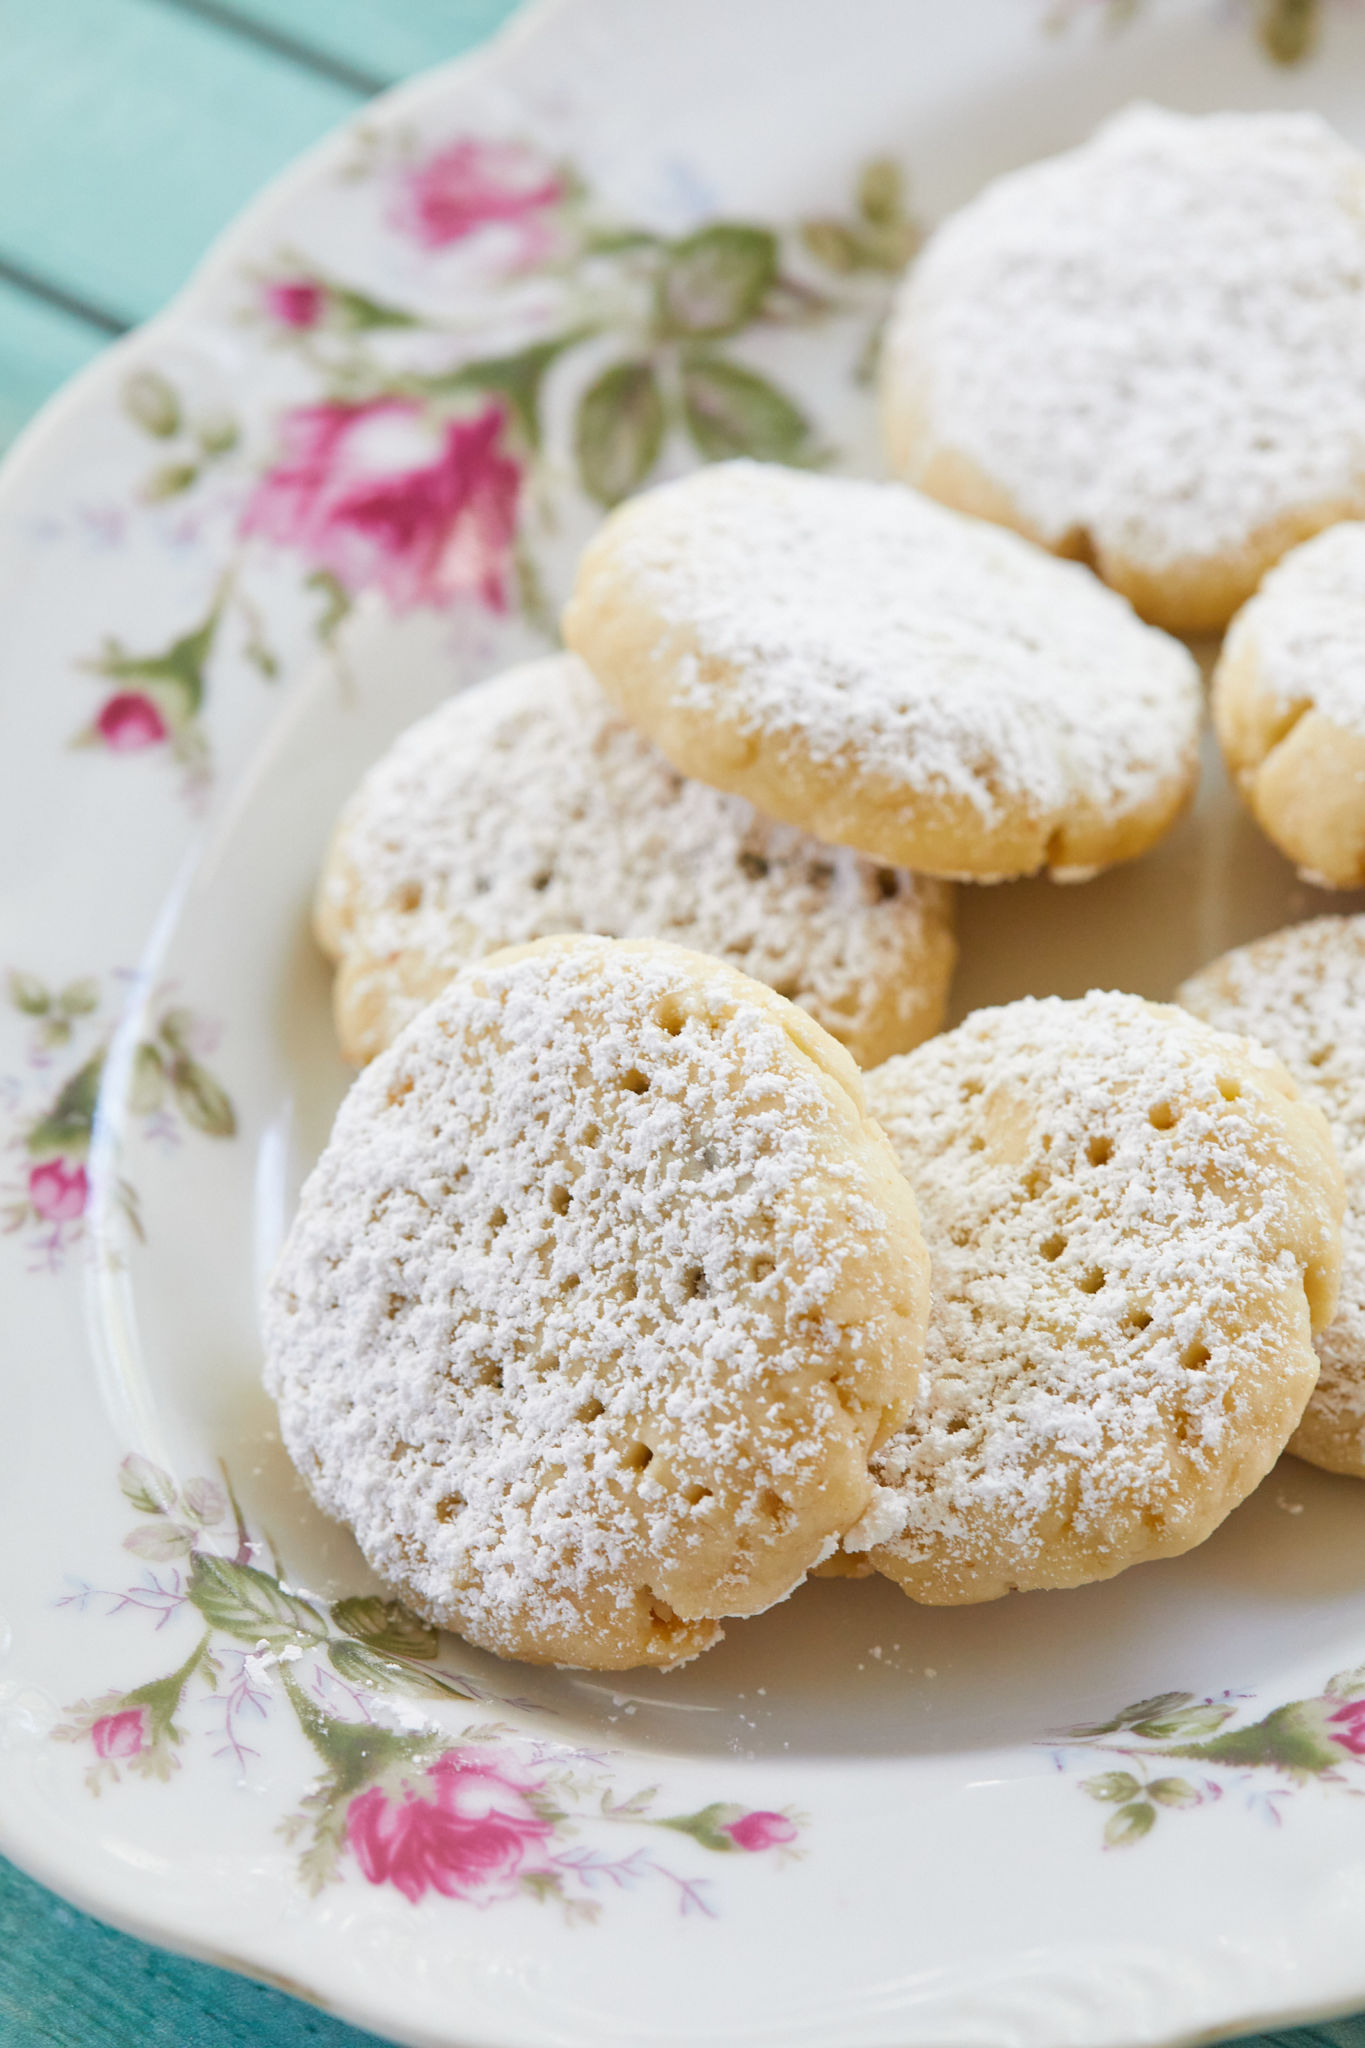 A plate of delicate Maamoul cookies, dusted with powdered sugar.